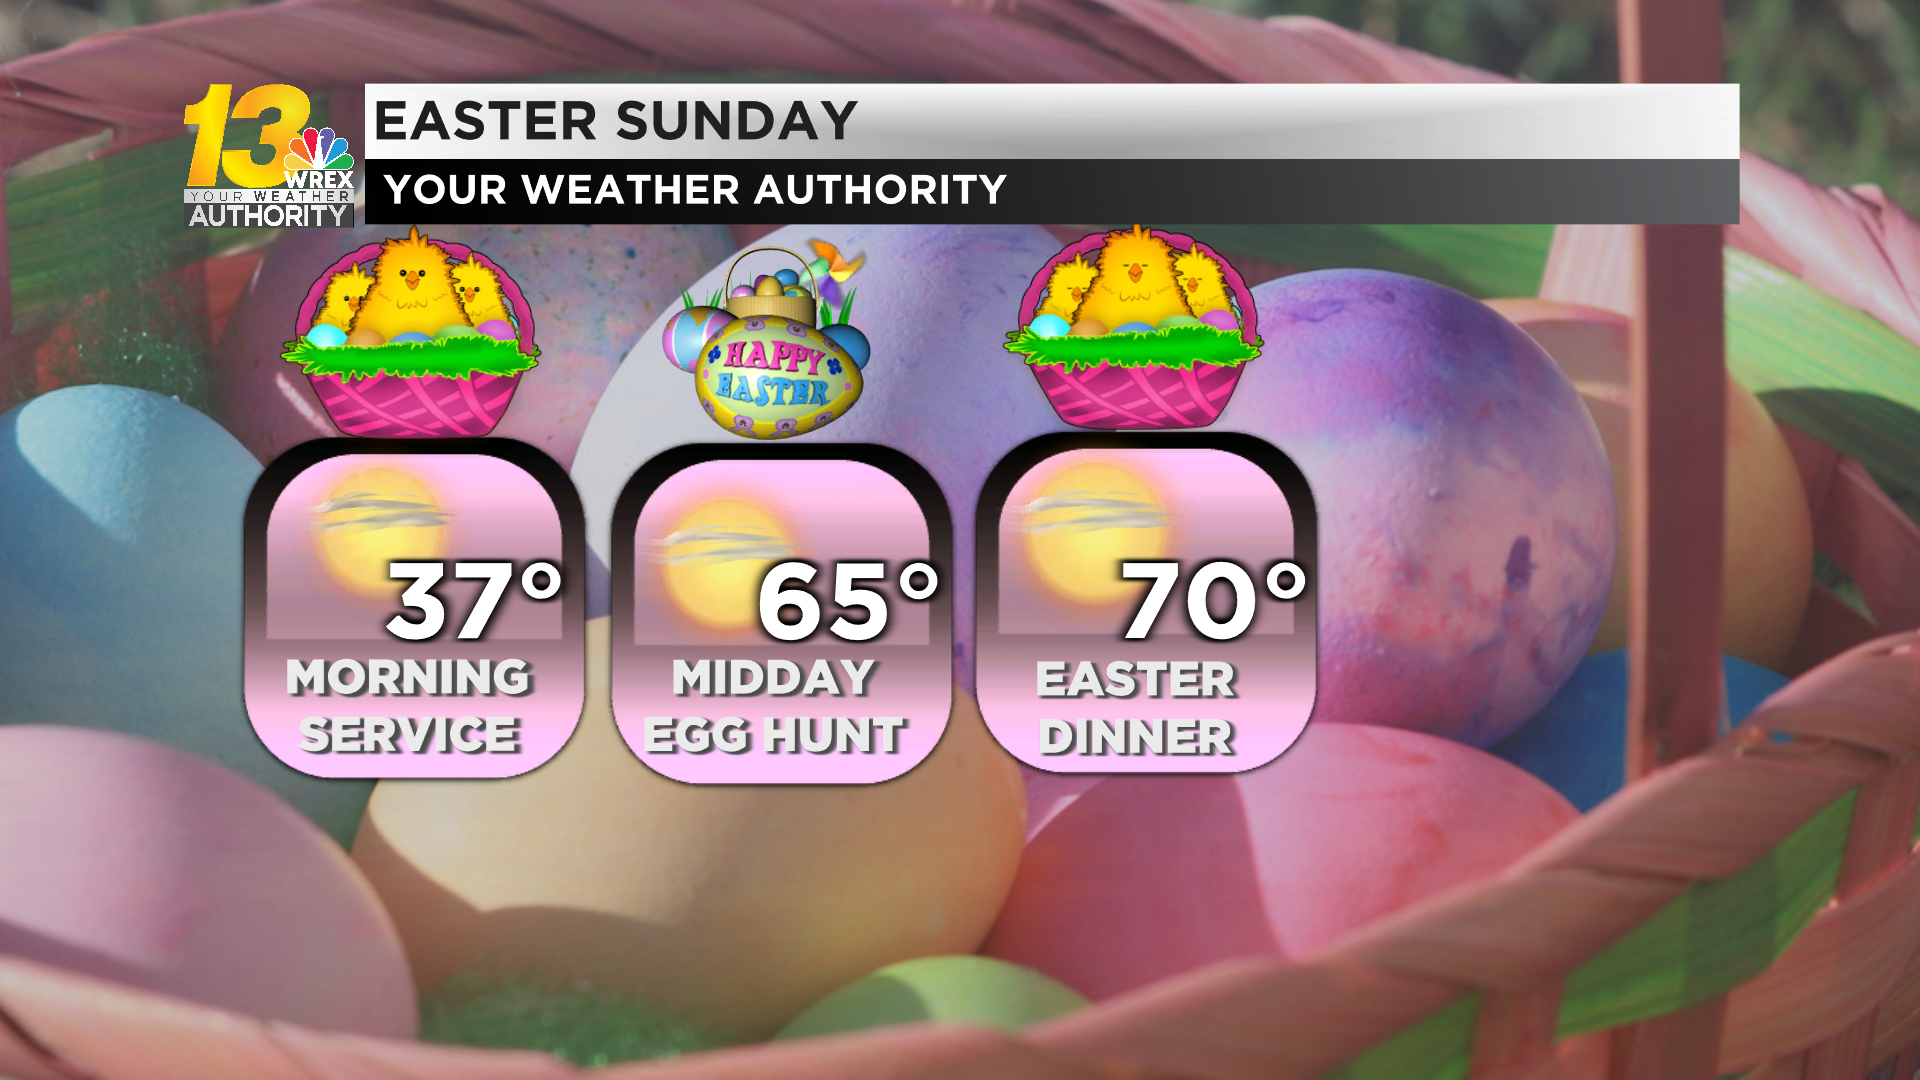 Easter Sunday features plenty of sunshine! As does the rest of the forecast